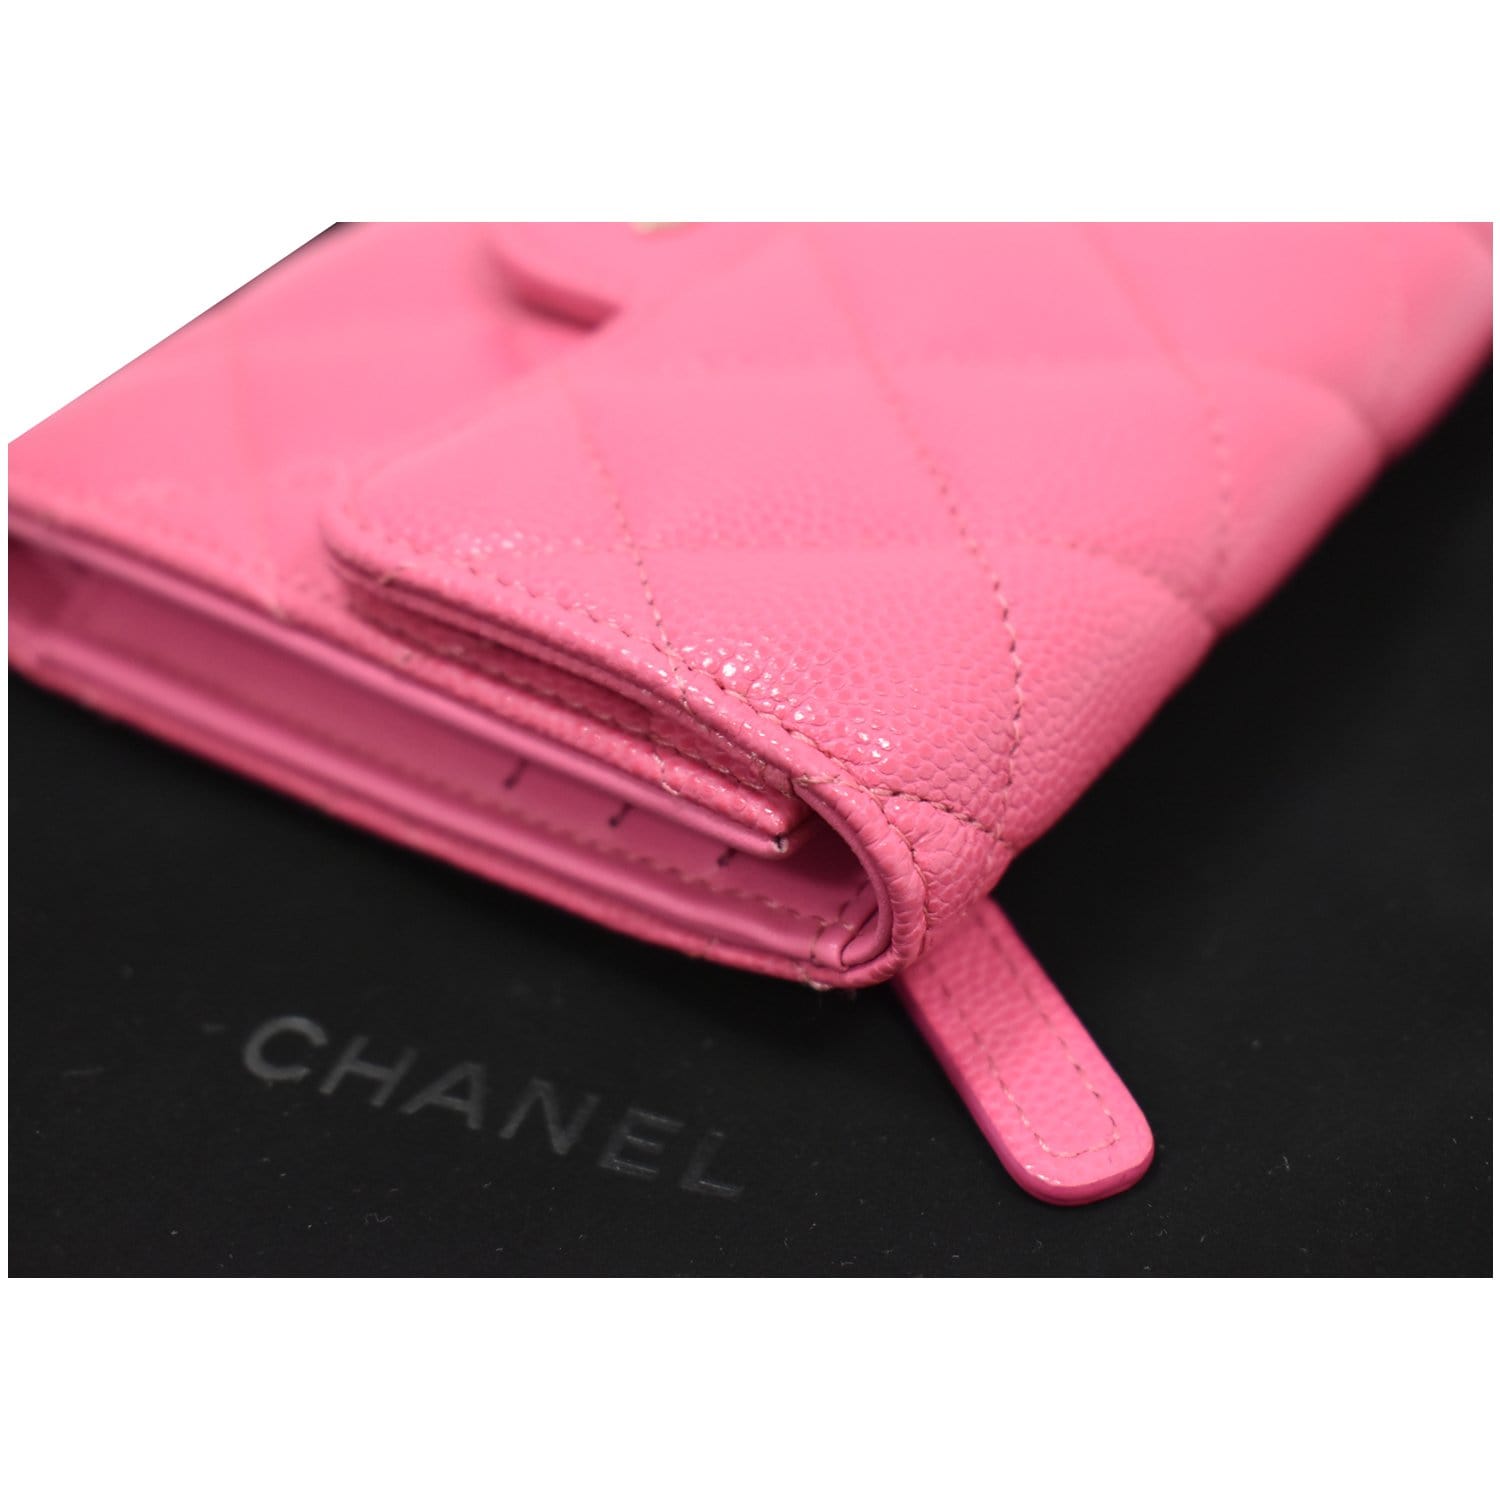 Chanel Caviar Quilted Flap Card Holder Wallet